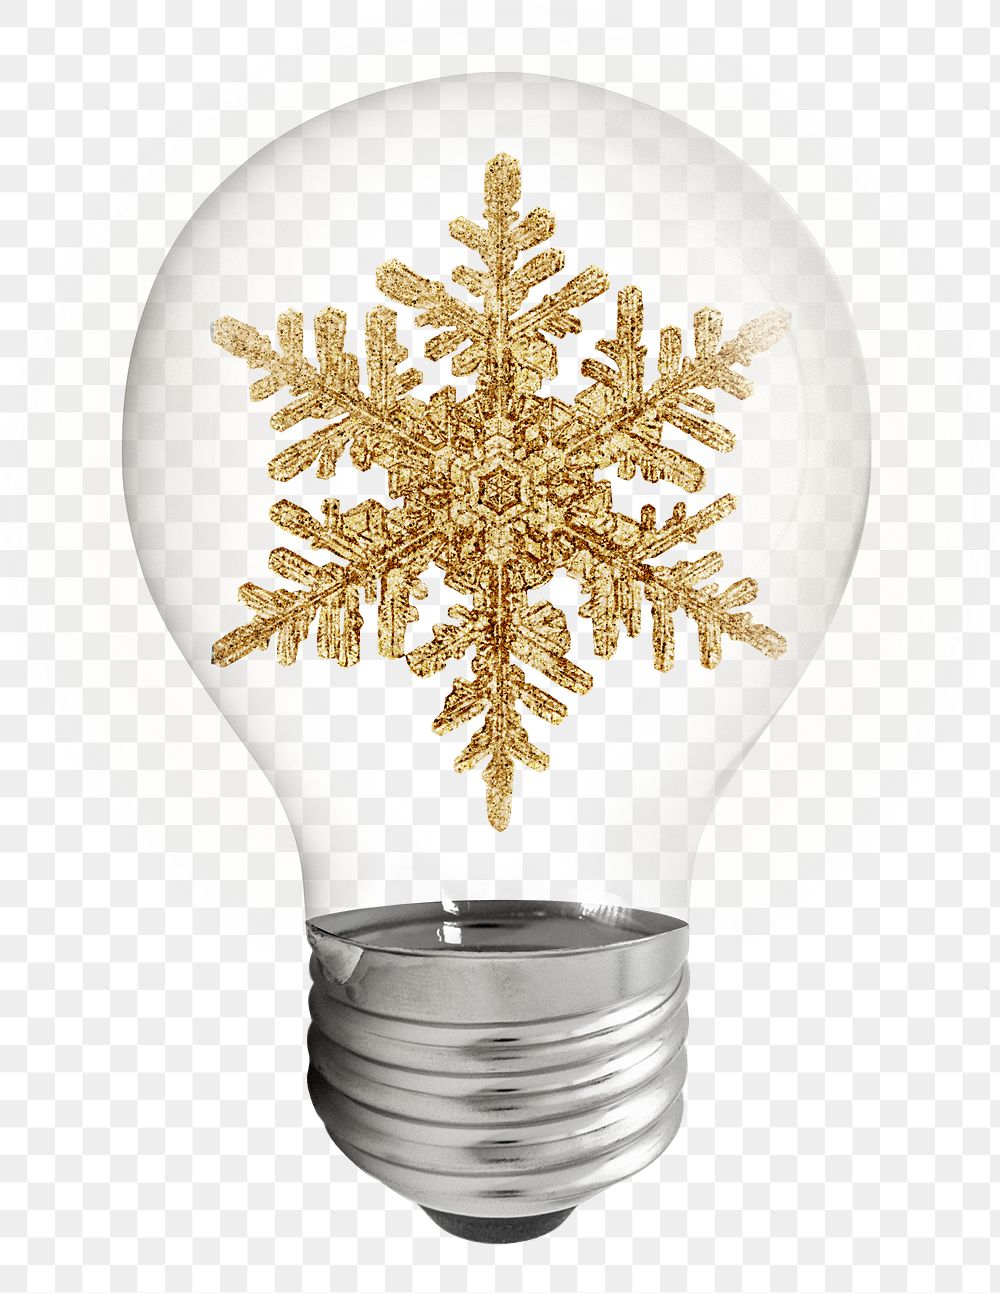 Gold snowflake png sticker, light bulb Christmas creative remix on transparent background